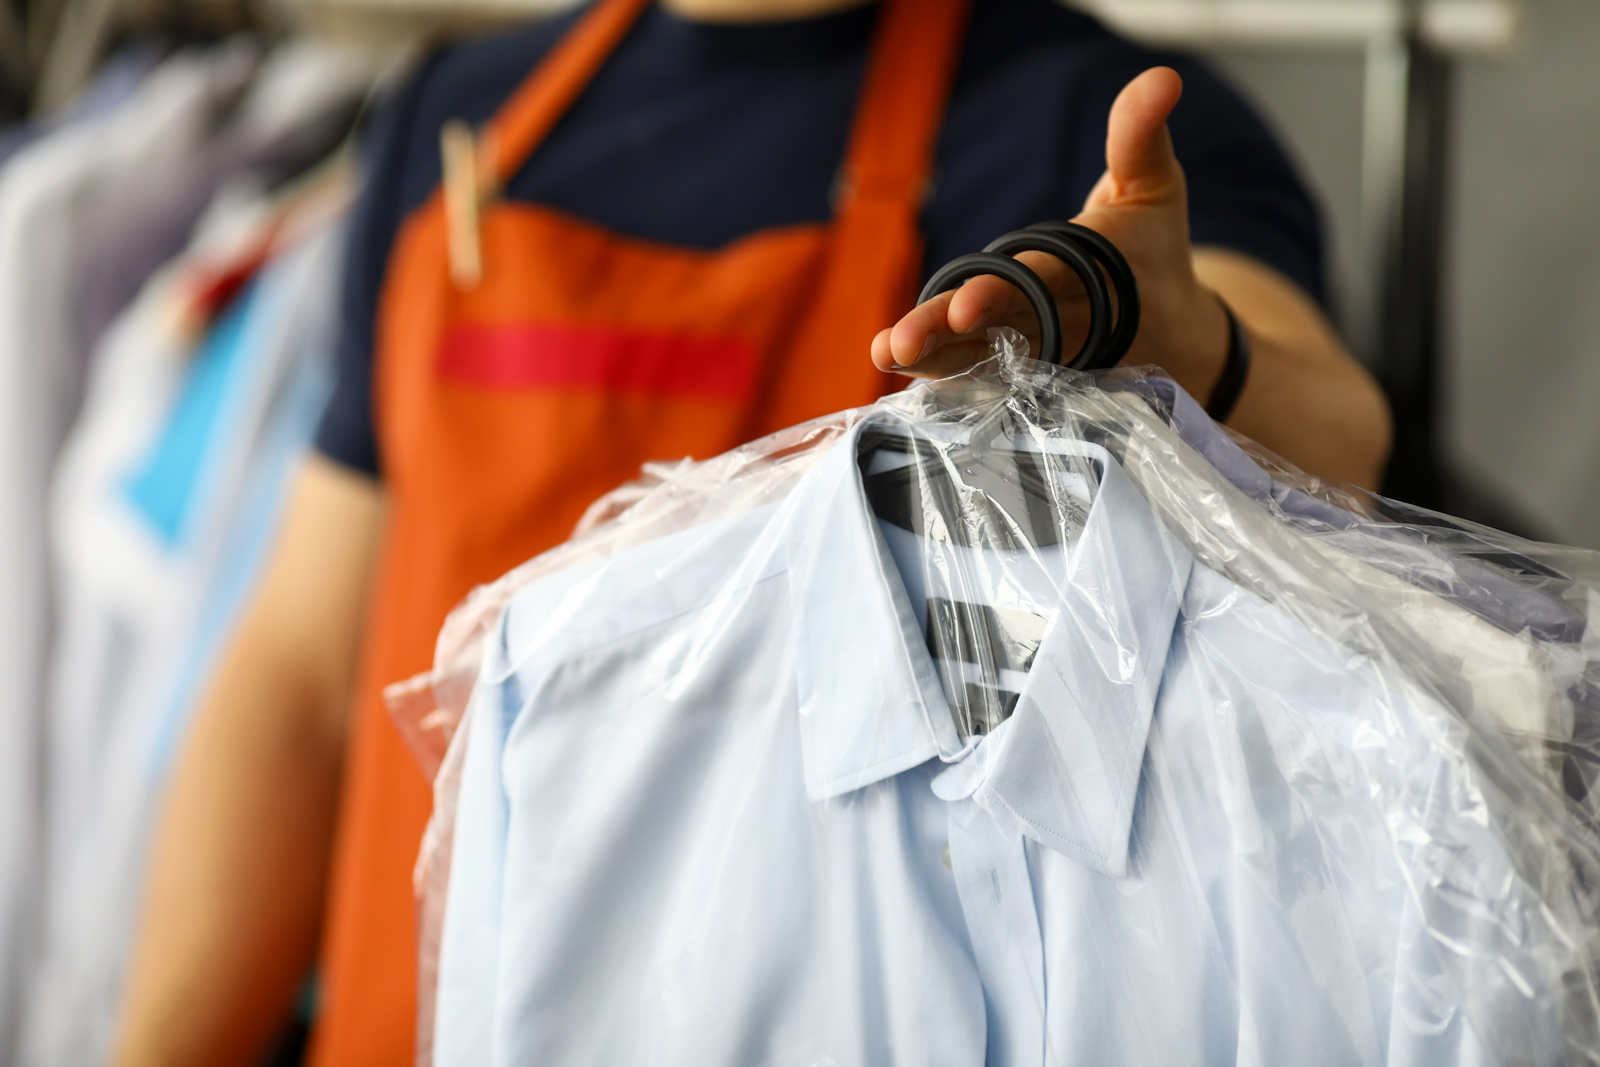 Martinizing Dry Cleaning in Pearland